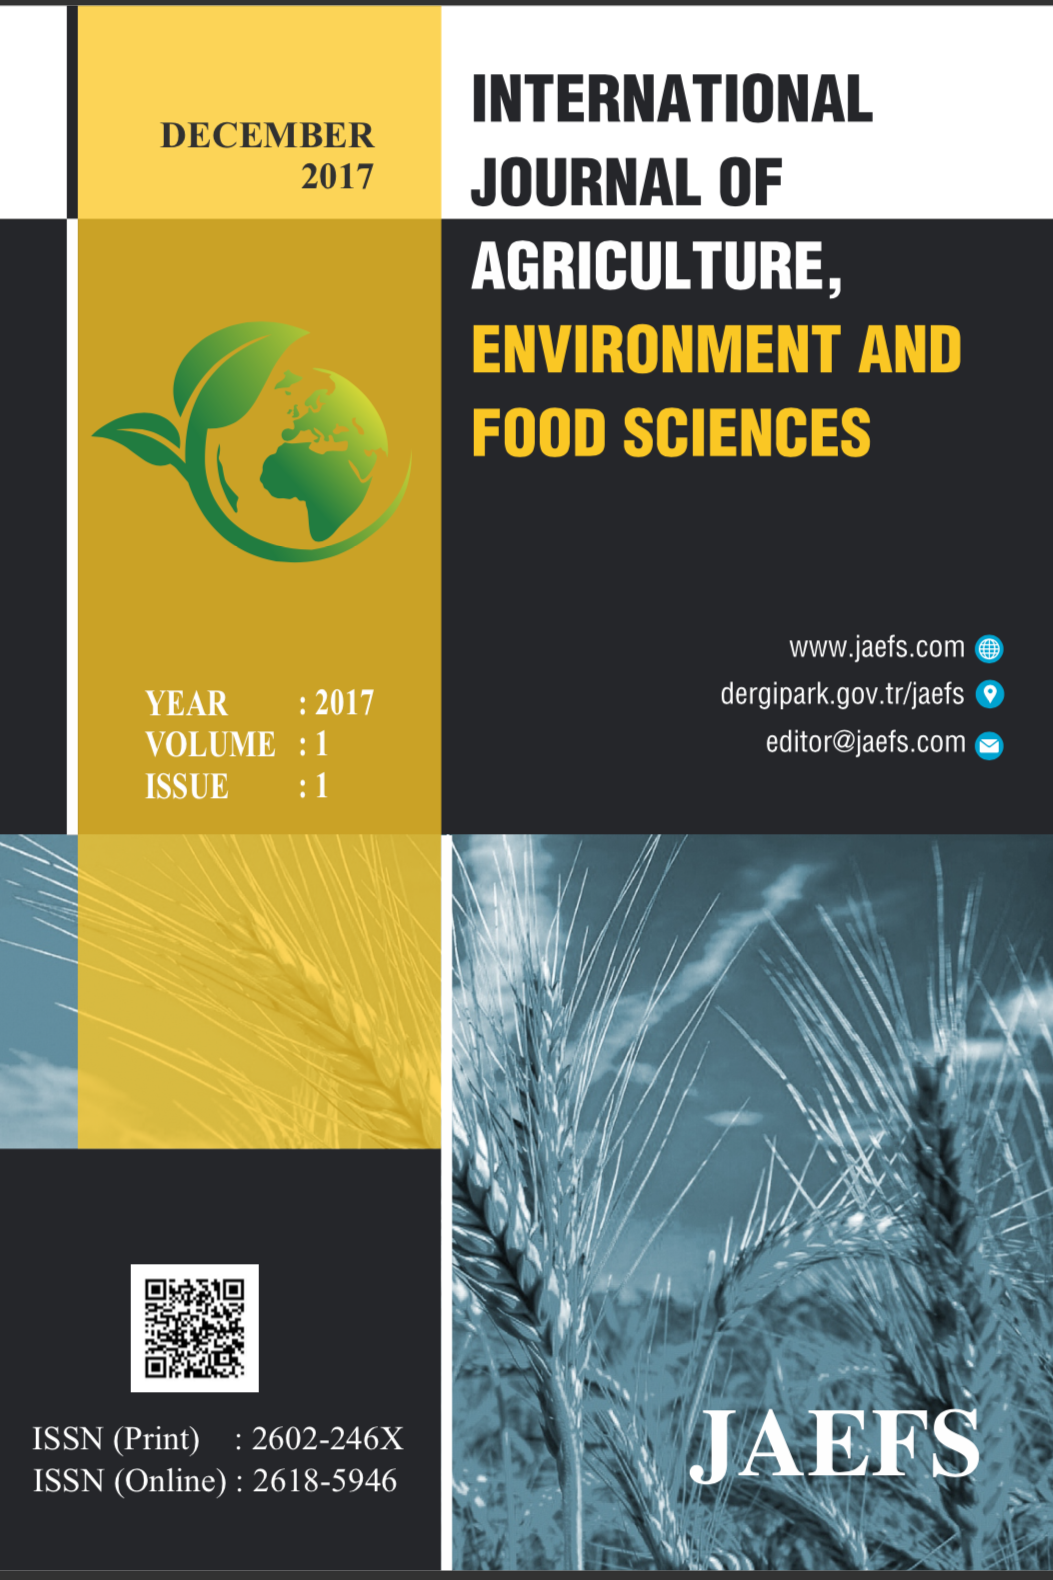 International Journal of Agriculture Environment and Food Sciences